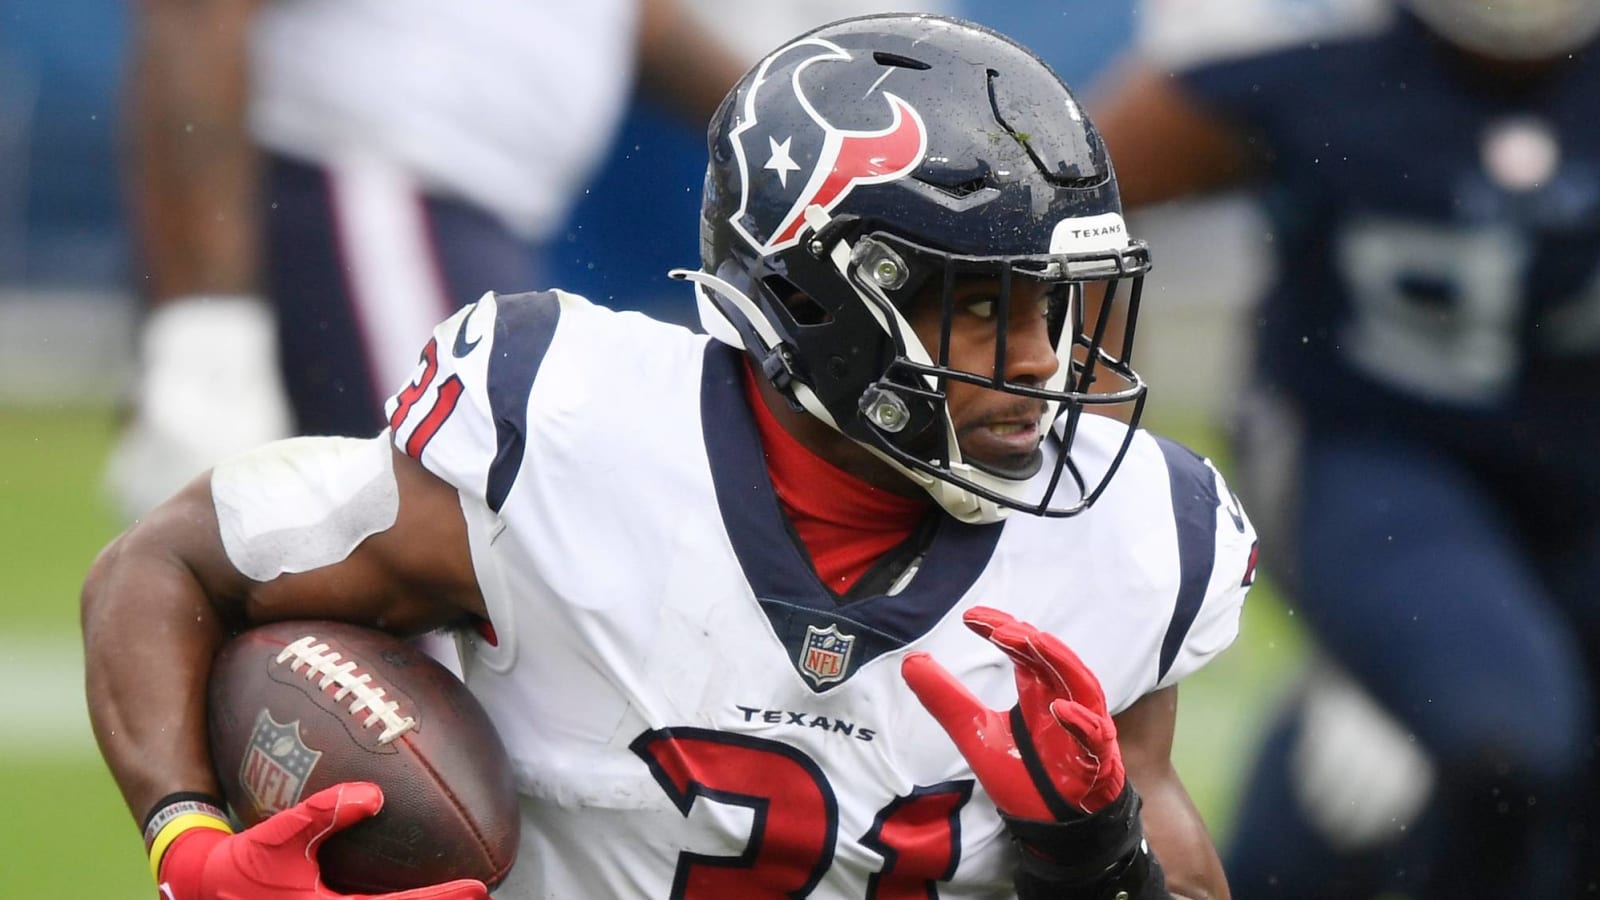 David Johnson welcomes 'competition' in Texans' backfield